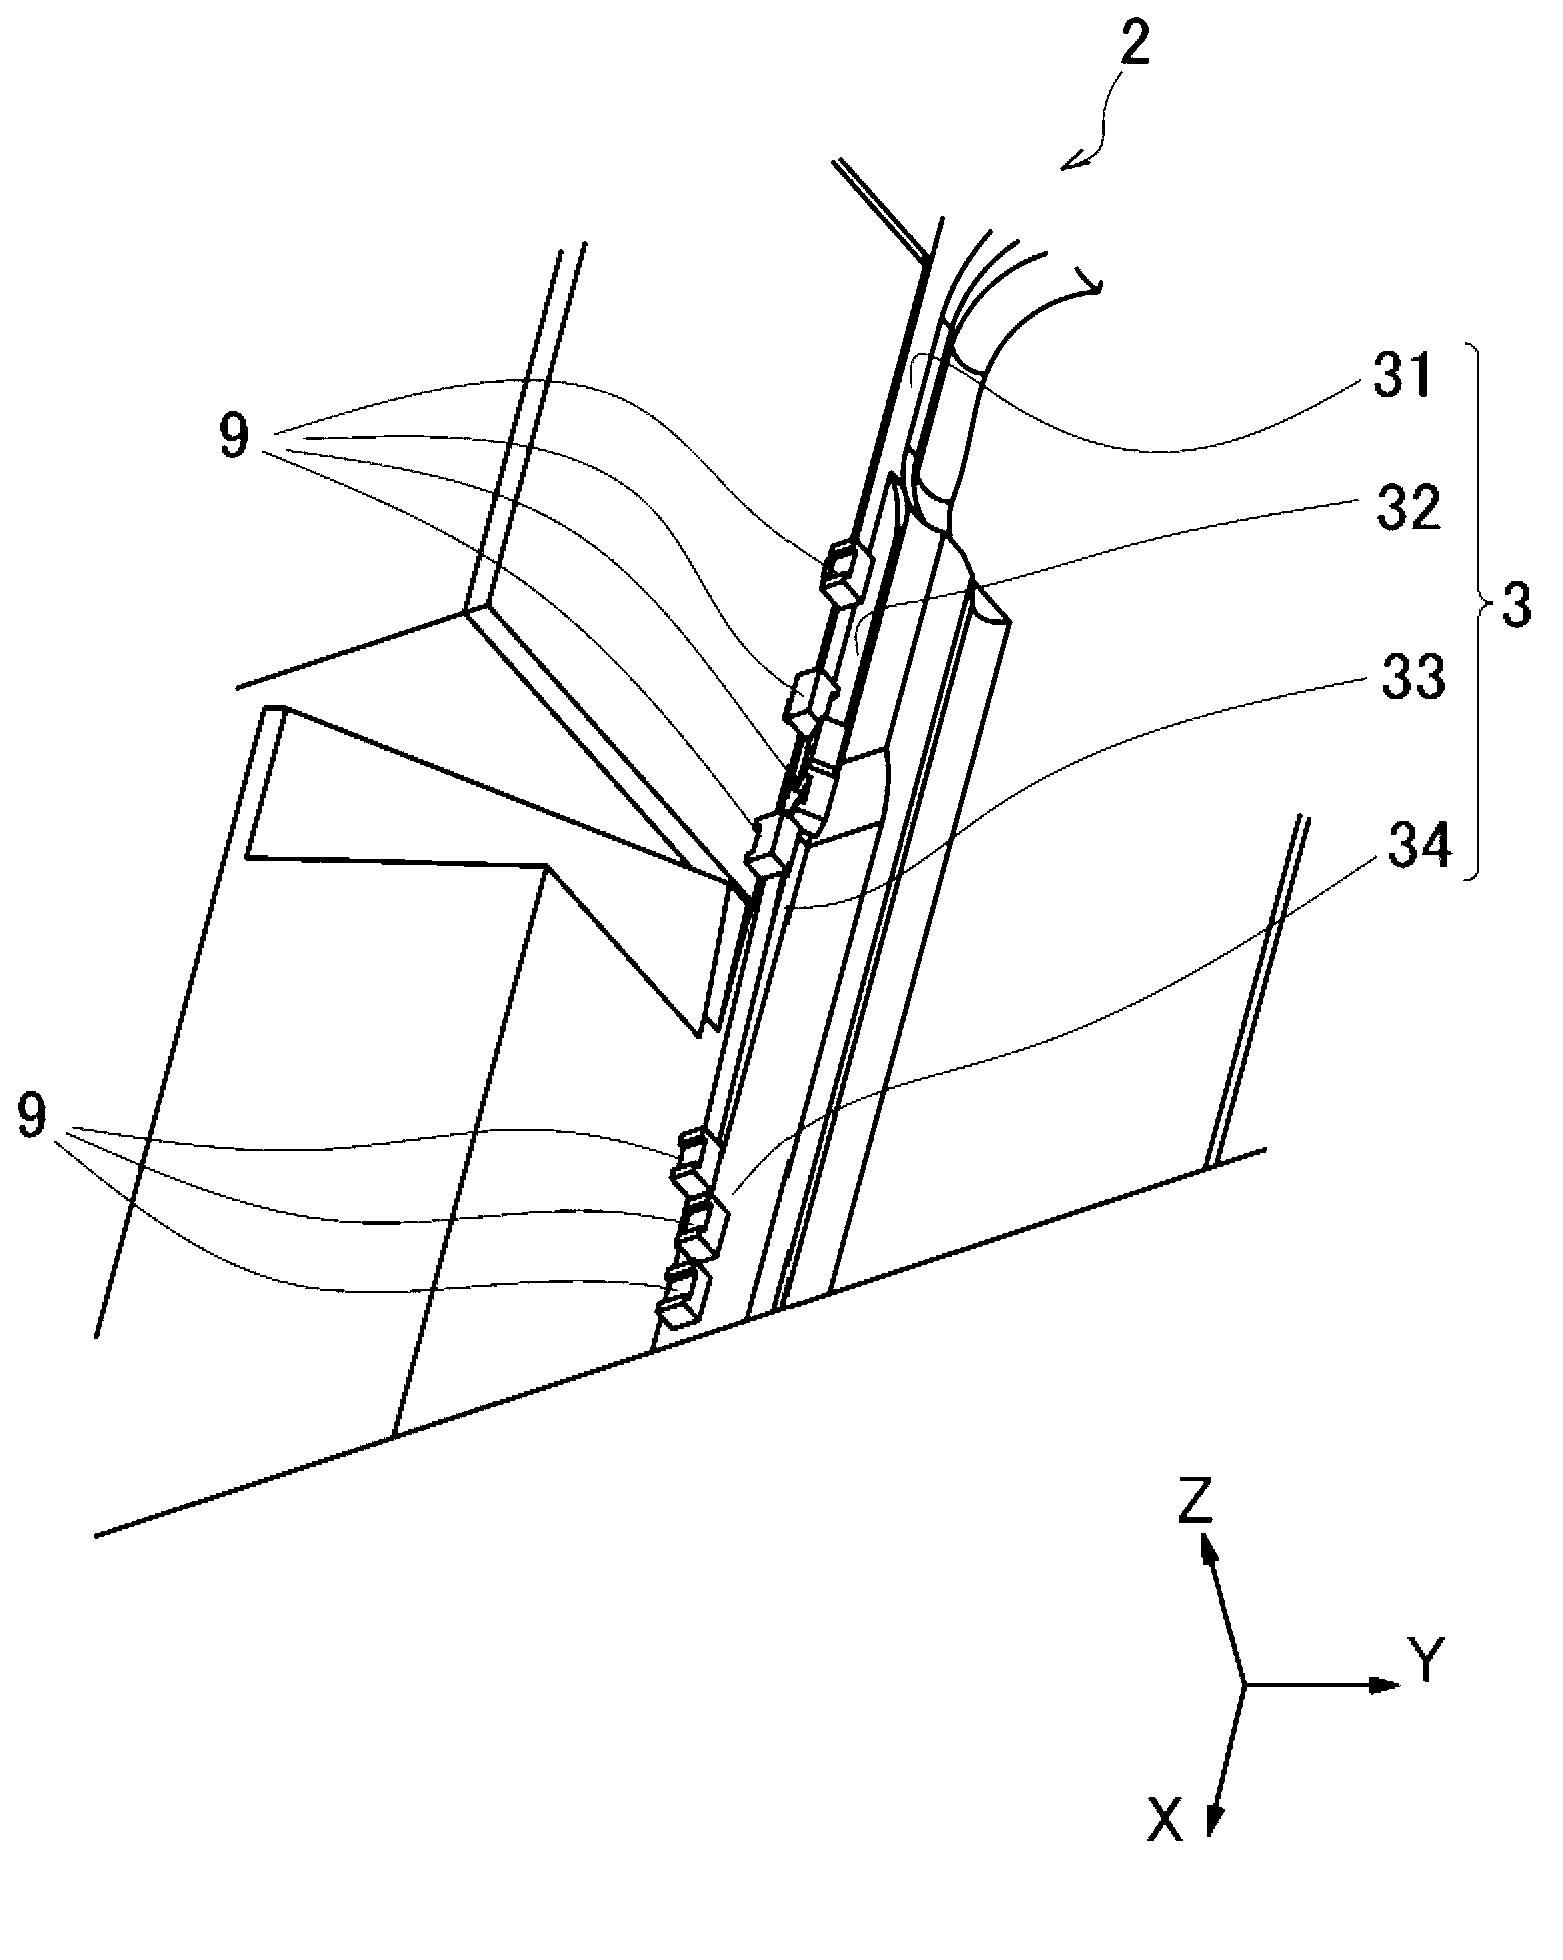 Workpiece aligning and conveying apparatus